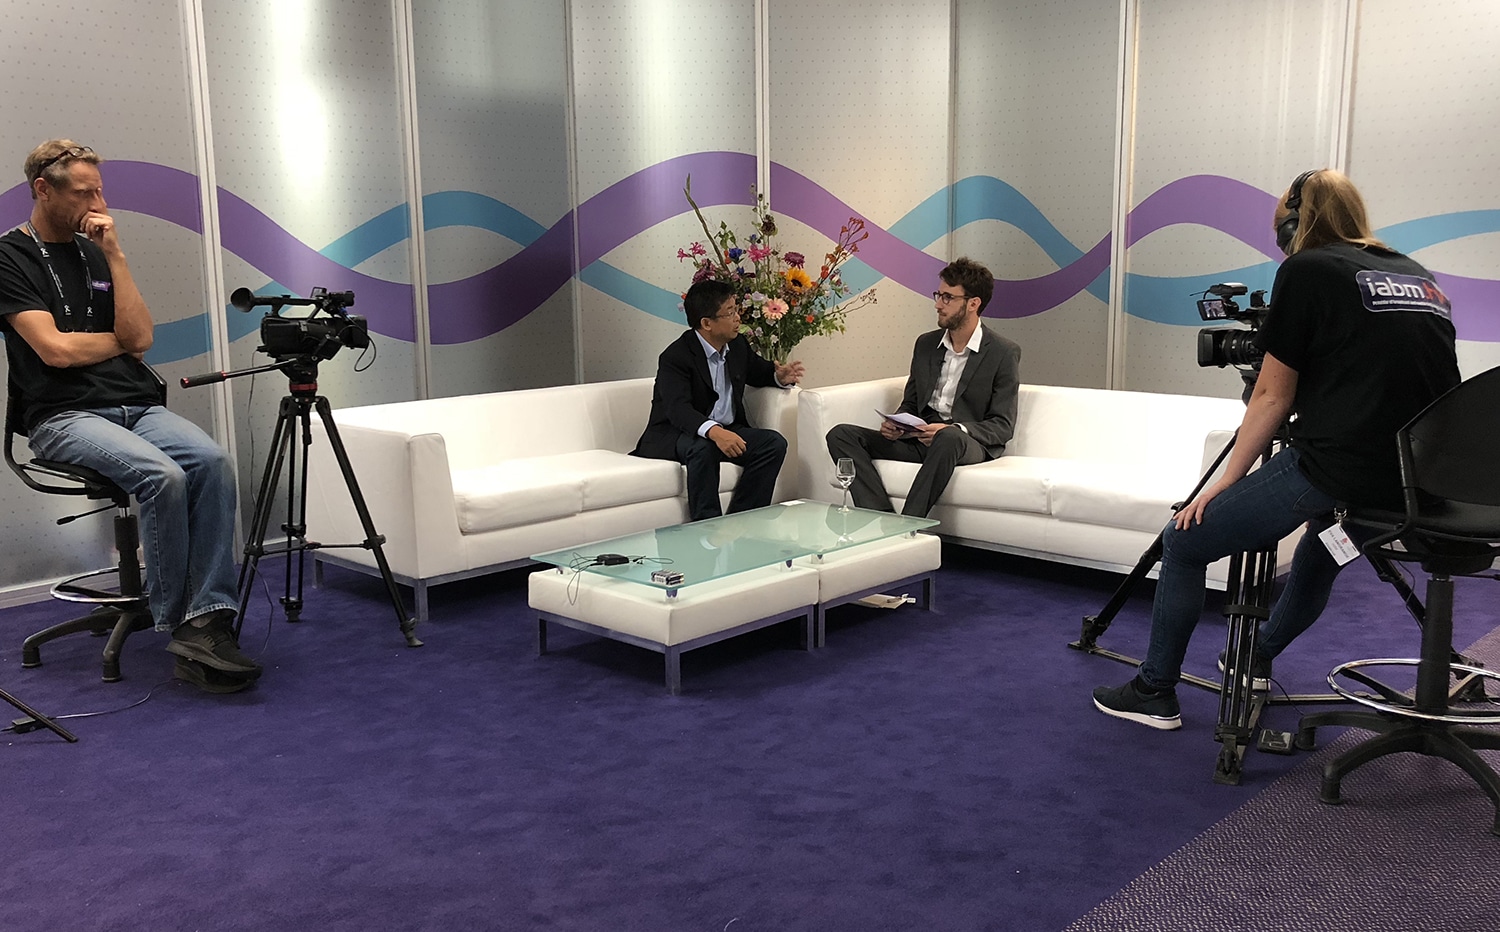 Conviva's CEO, Hui Zhang on Interviewed at IABM TV